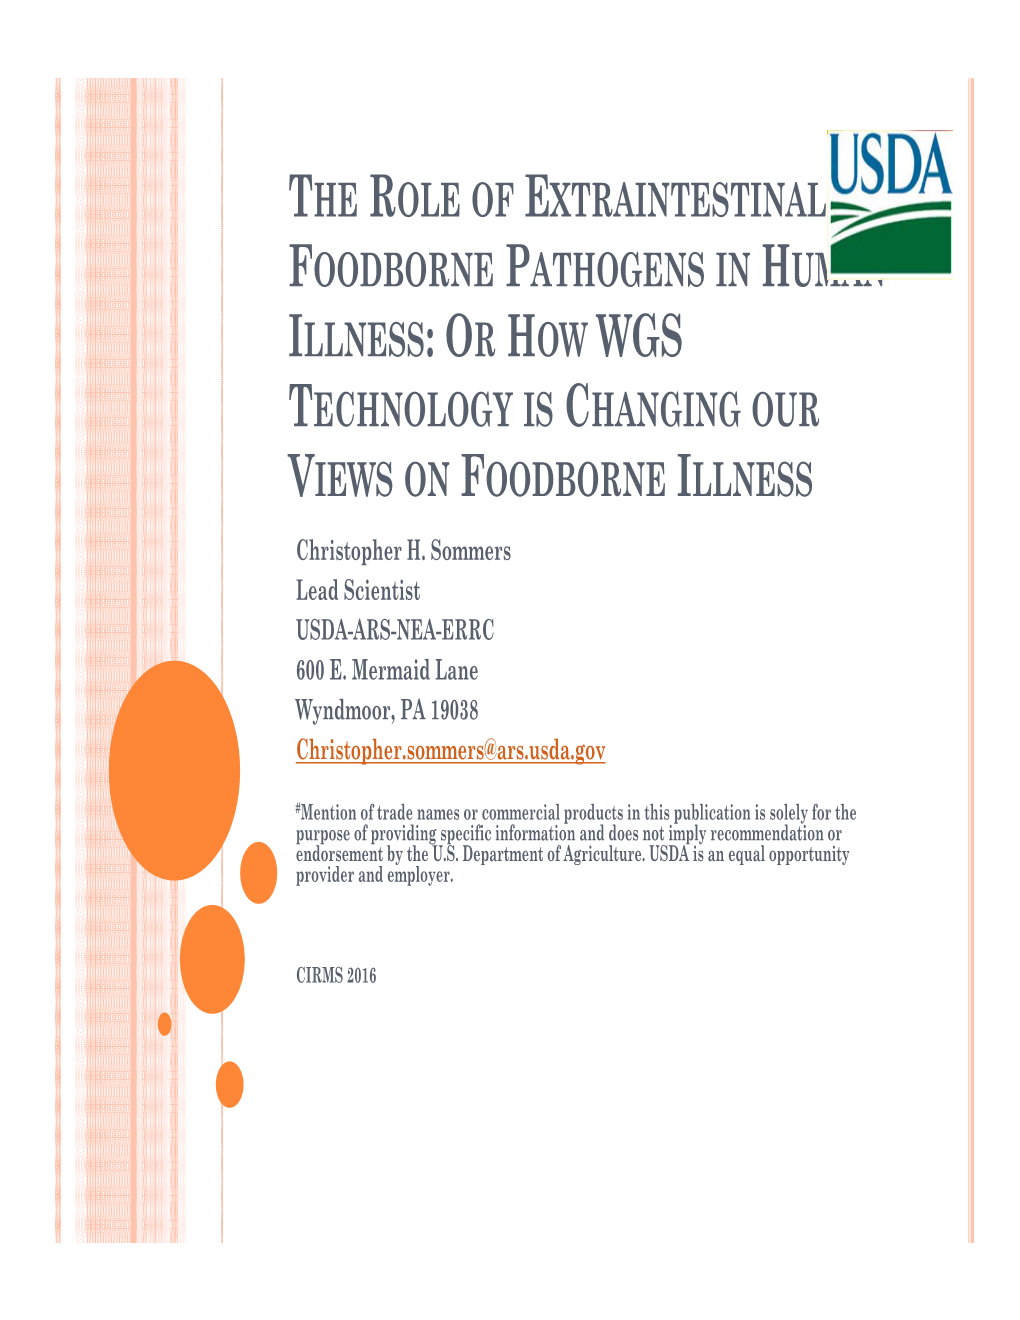 The Role of Extraintestinal Foodborne Pathogens in Human Illness: Or How Wgs Technology Is Changing Our Views on Foodborne Illness